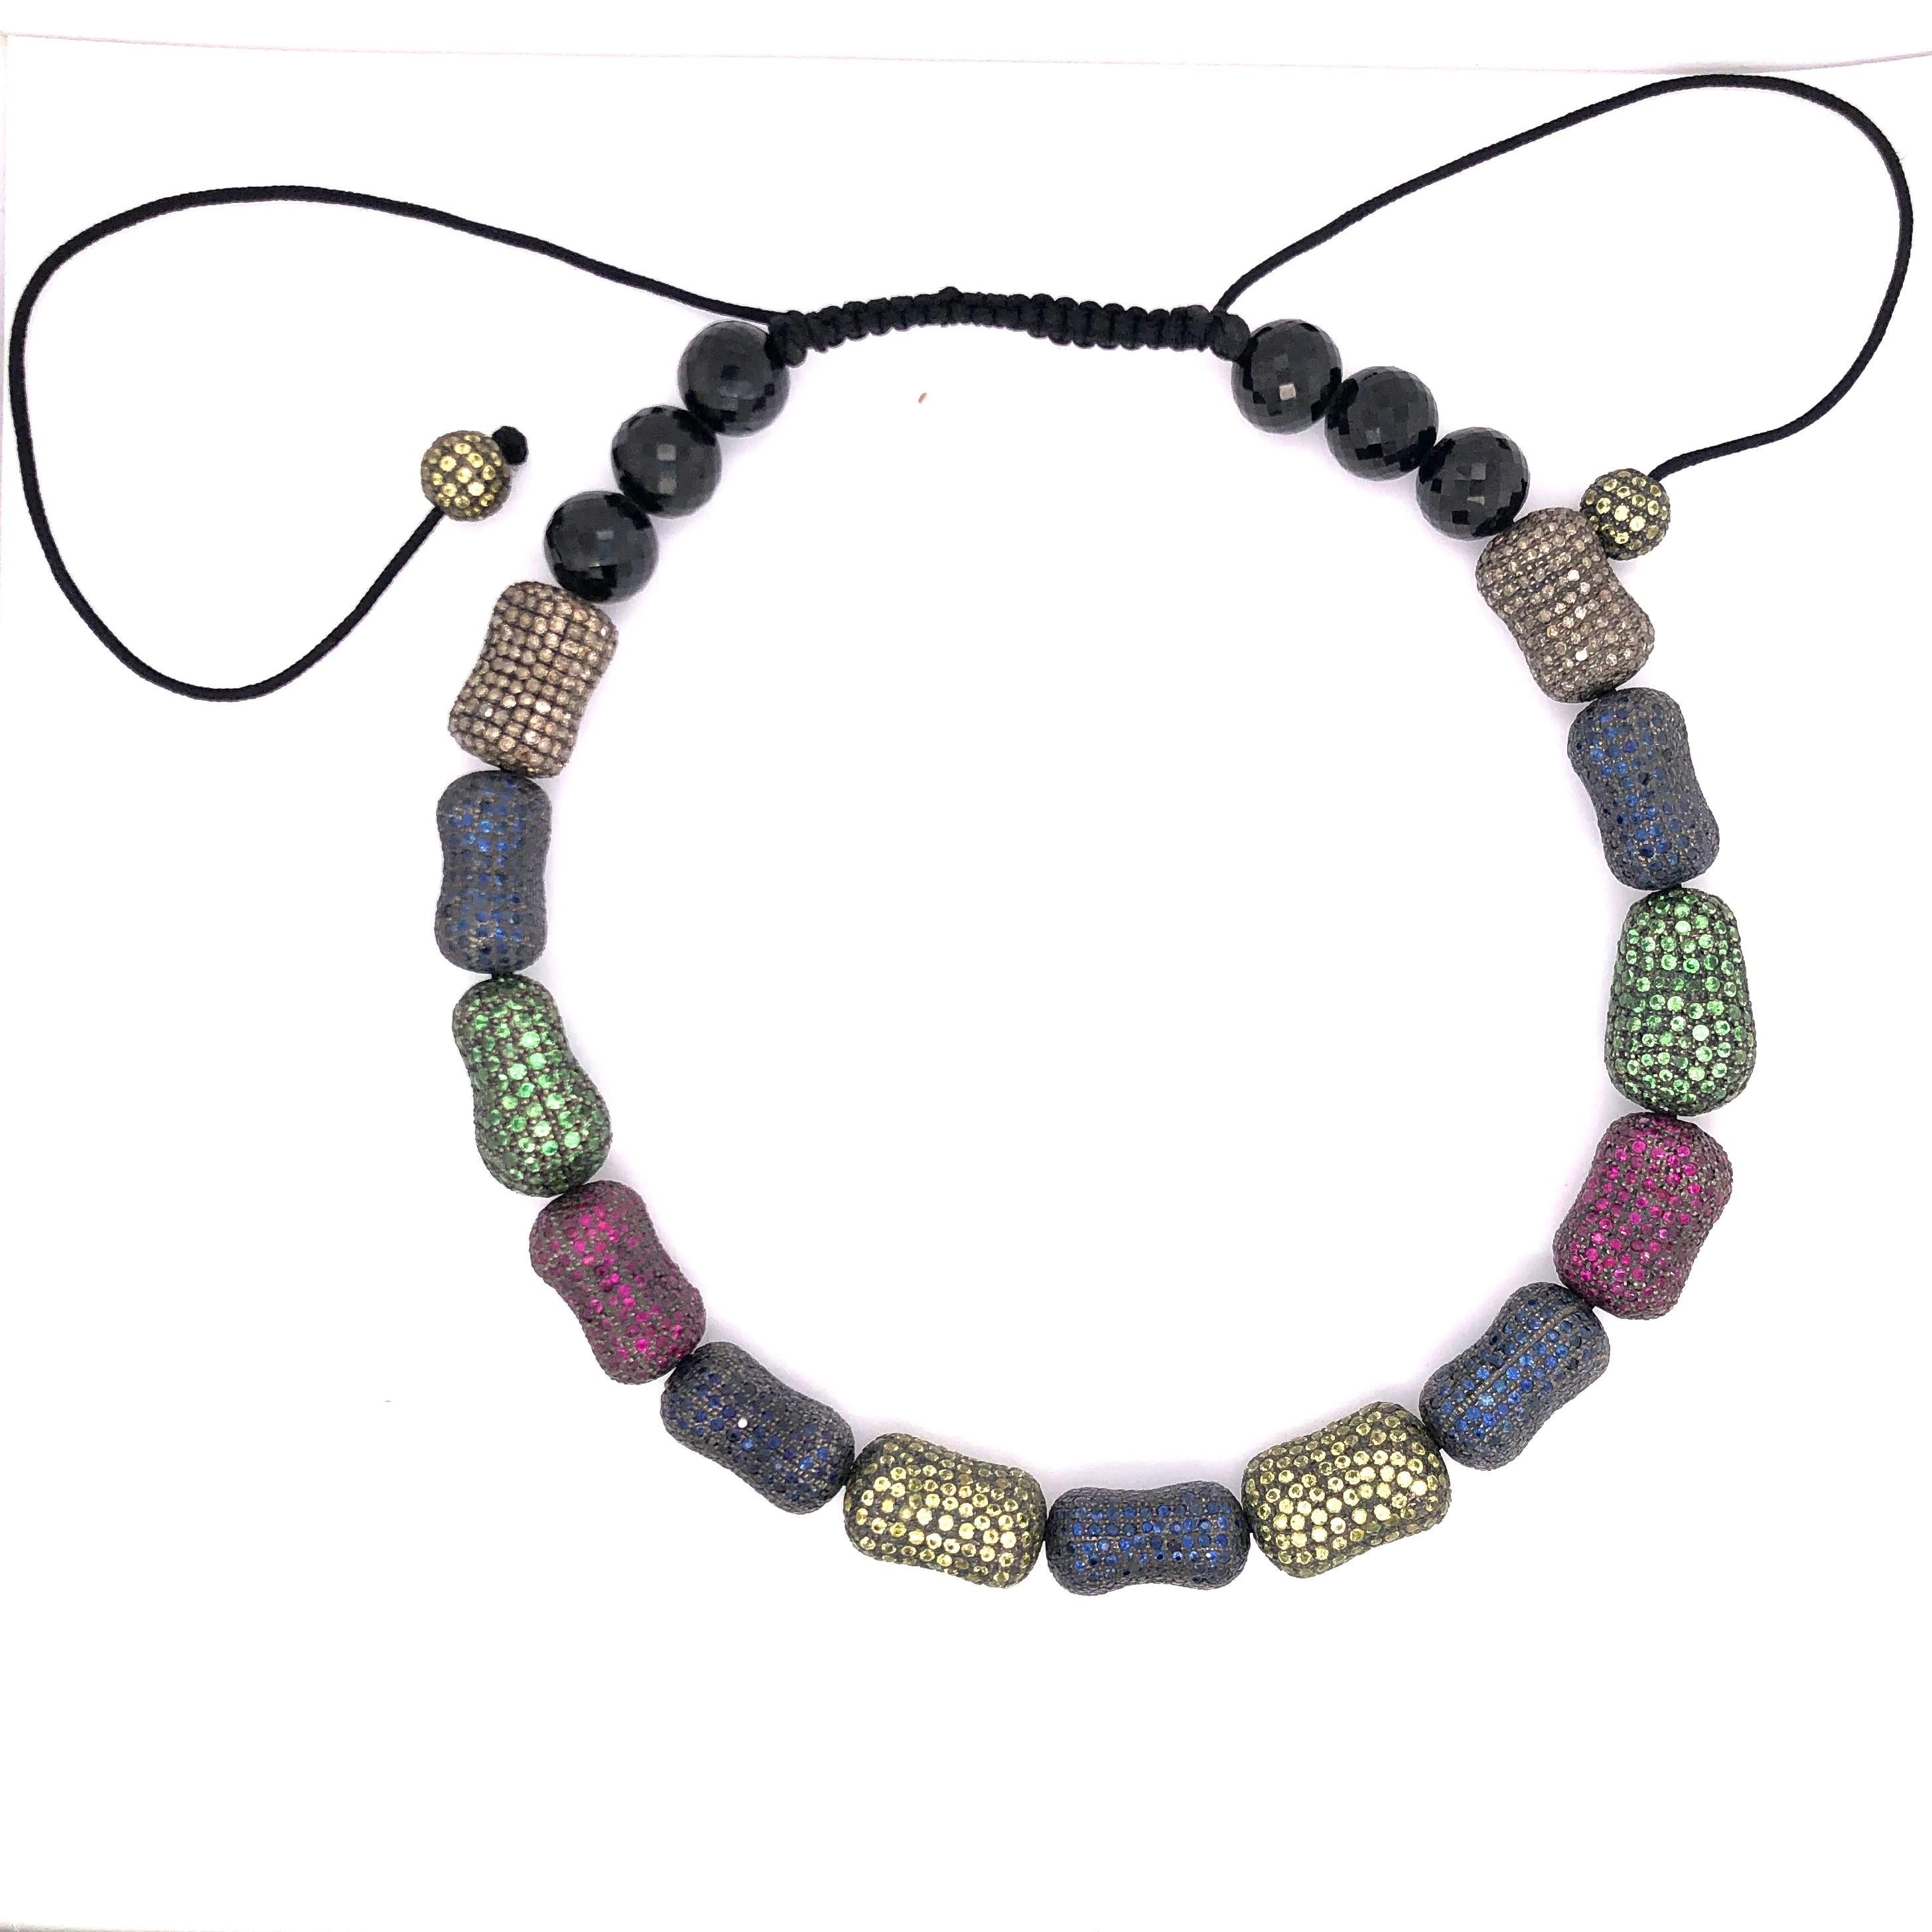 Very Stylish this Multi Color Stones like Sapphire, Tsavorite, Ruby  Macrame Choker is fun and very trendy. This Choker has multi sapphire pave beads with onyx stones at back and 2 round beads hanging. This choker is beaded via black cotton cord and